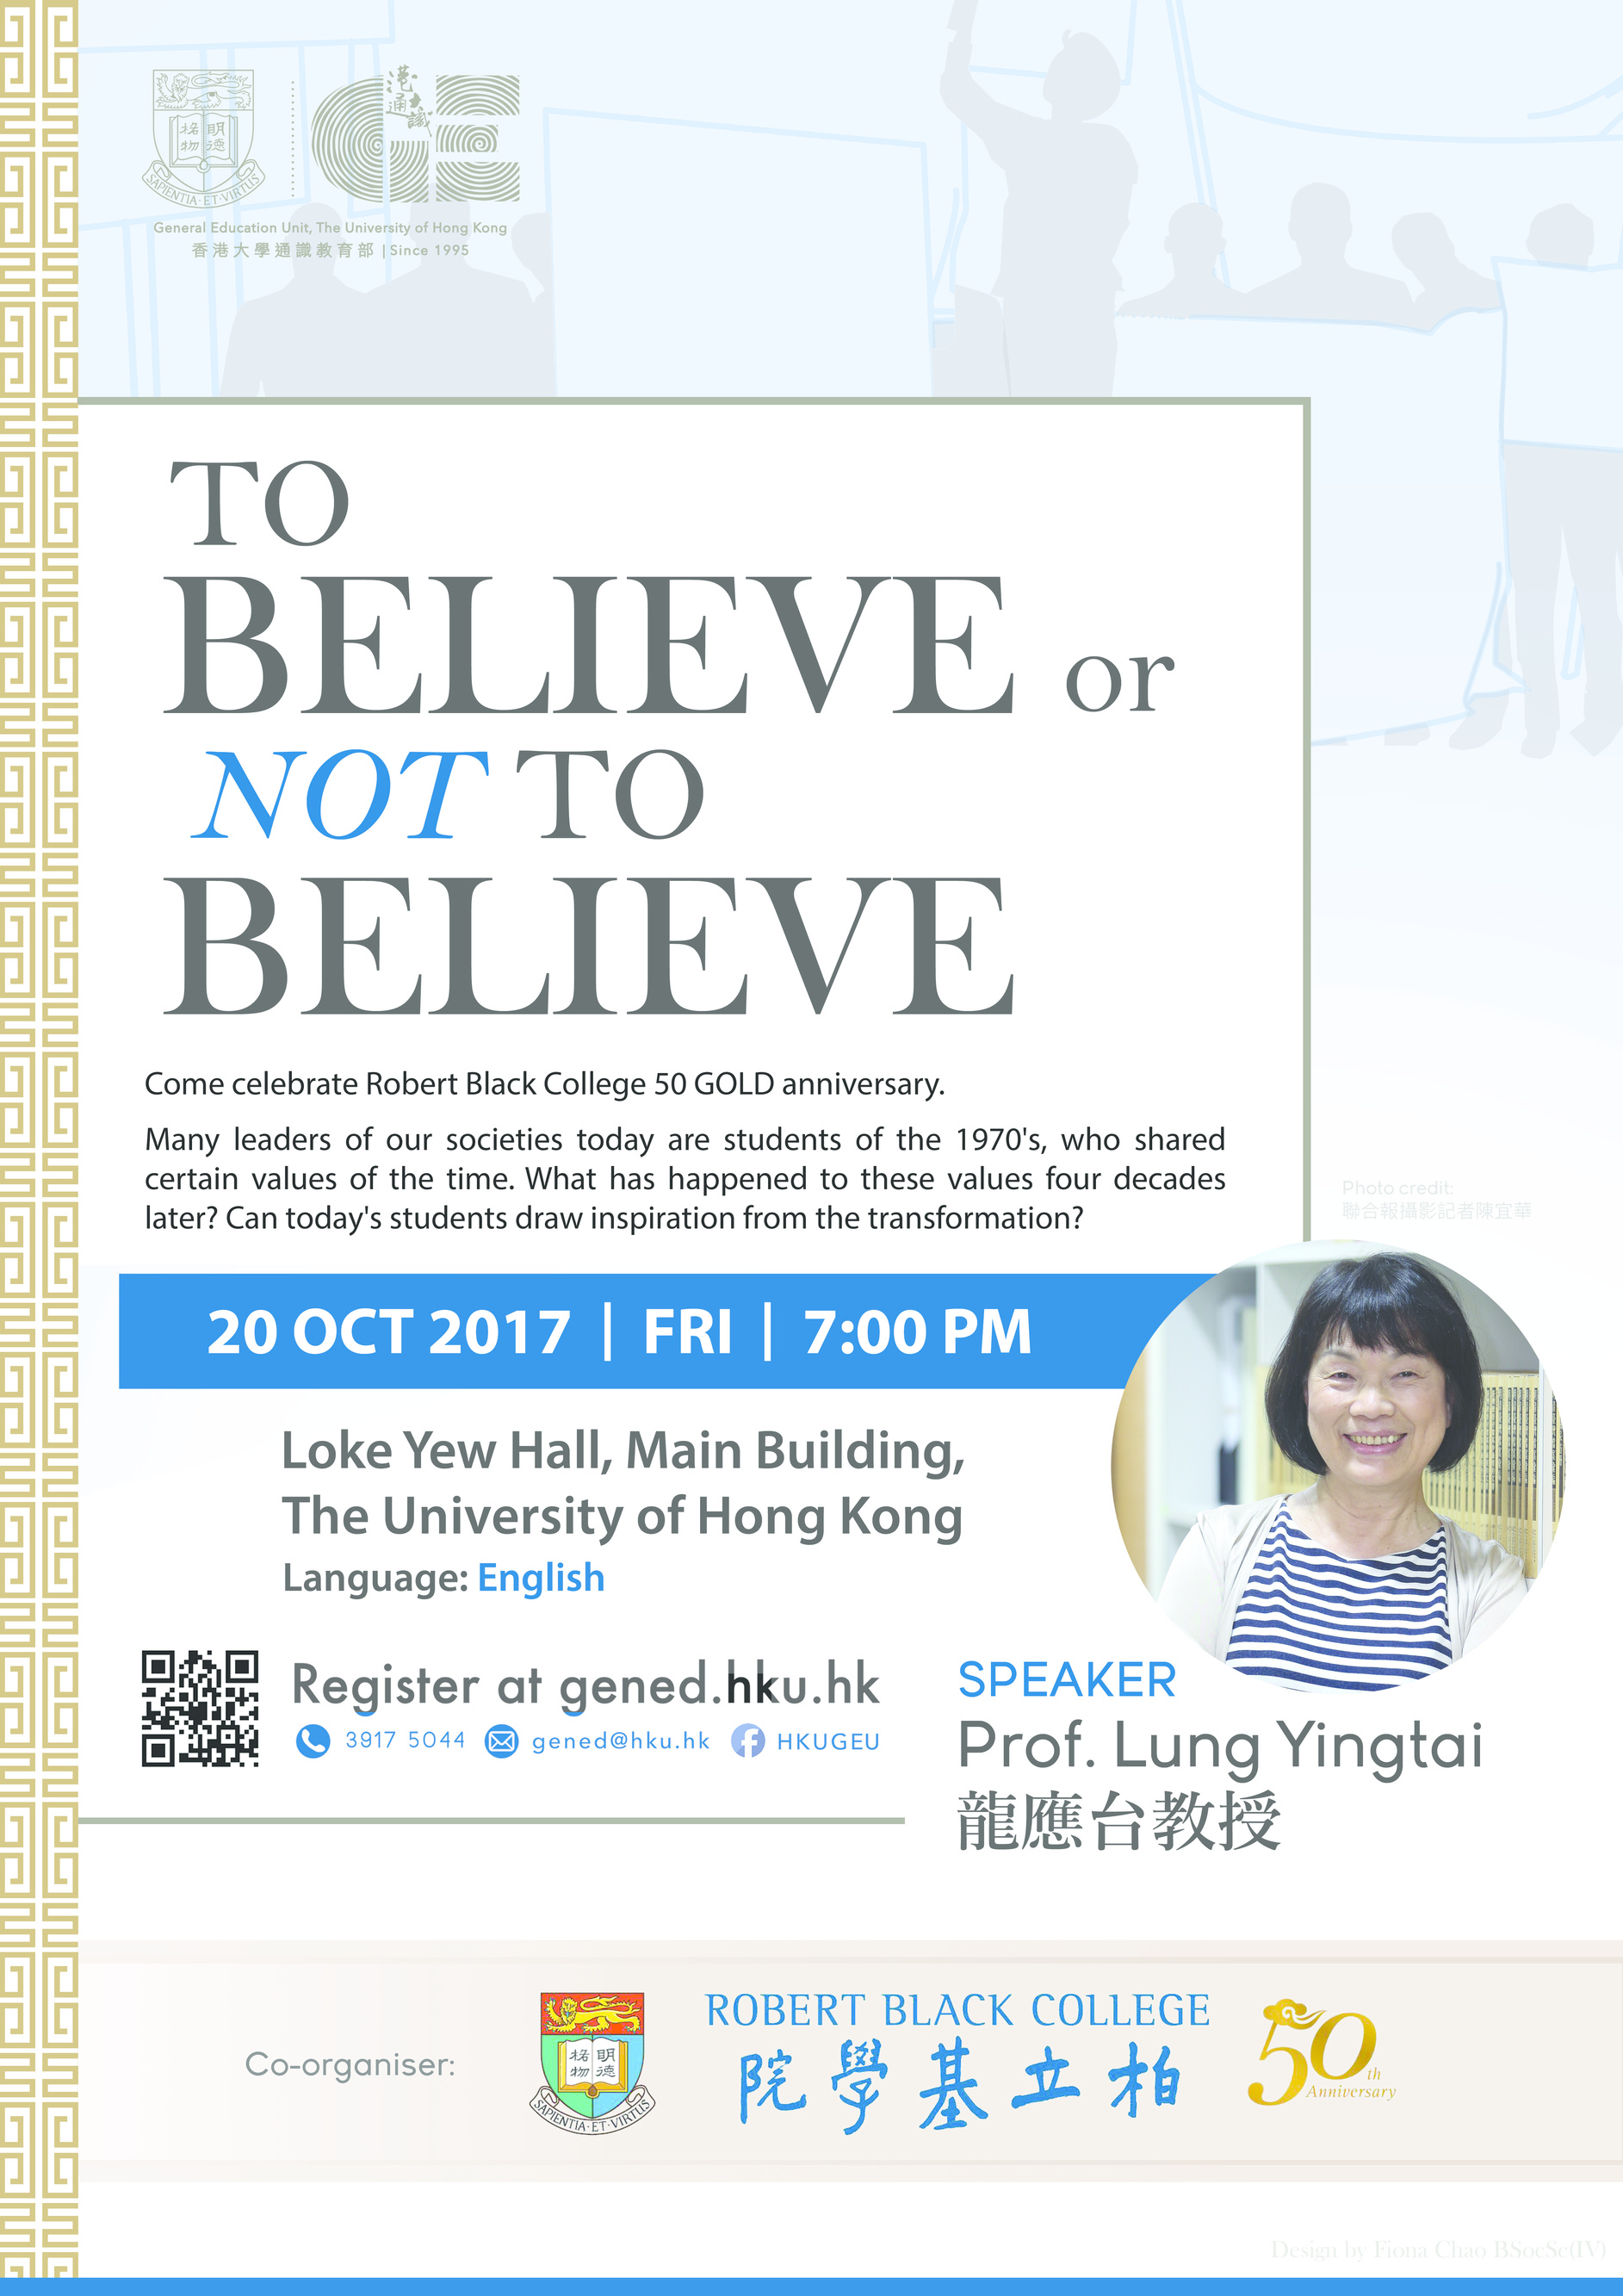 Prof. Lung Yingtai: To Believe or Not to Believe